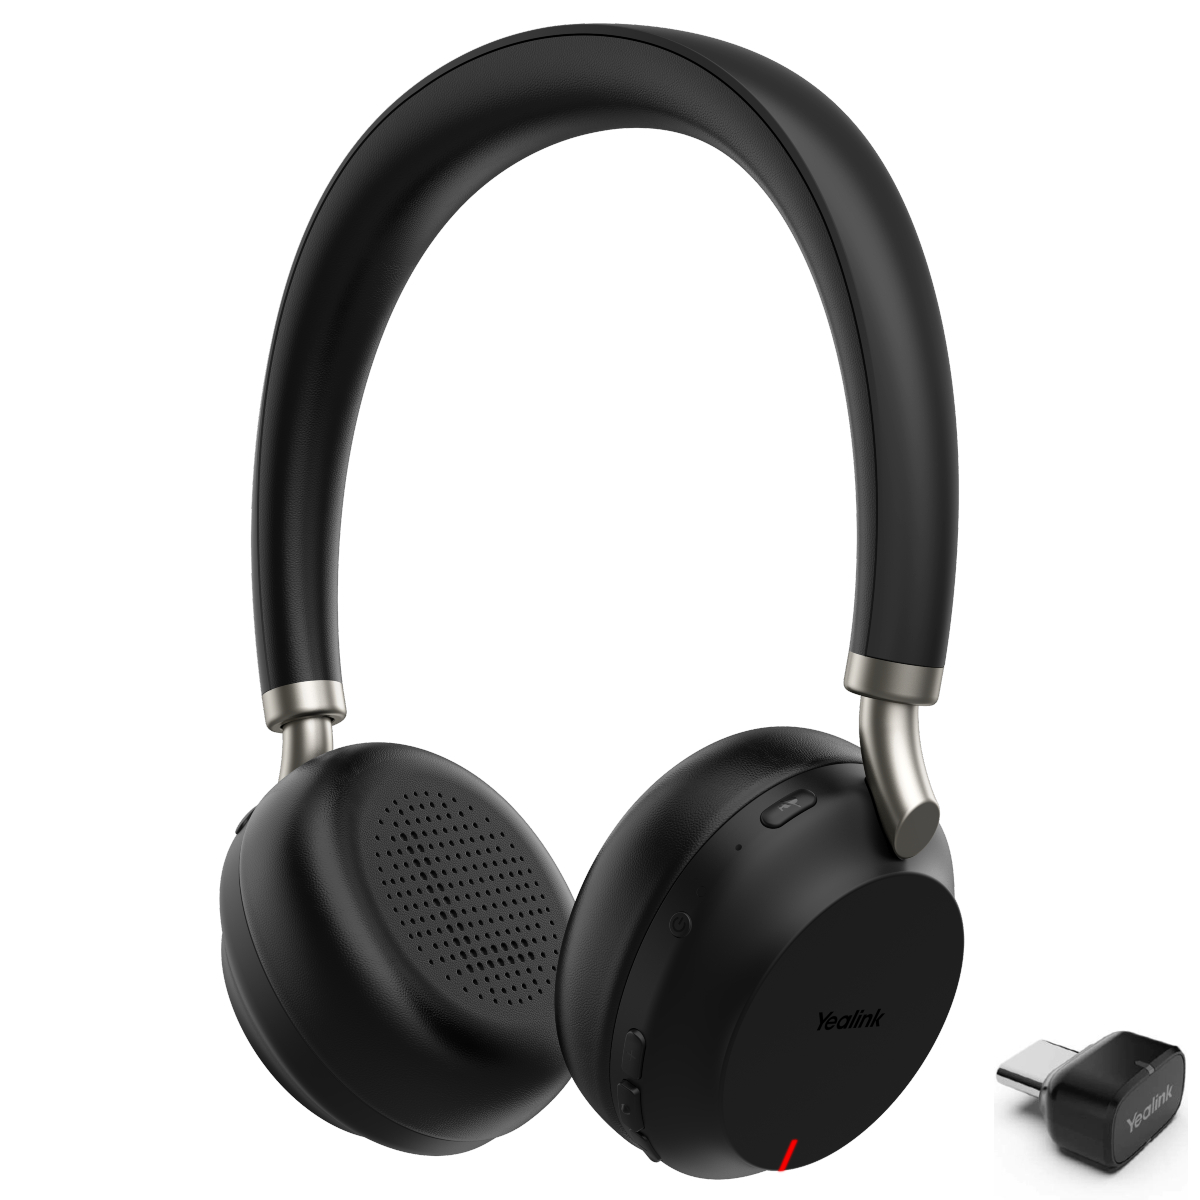 Yealink BH72 UC Stereo Headset with BT51 USB-C Adapter - Black - 1208638